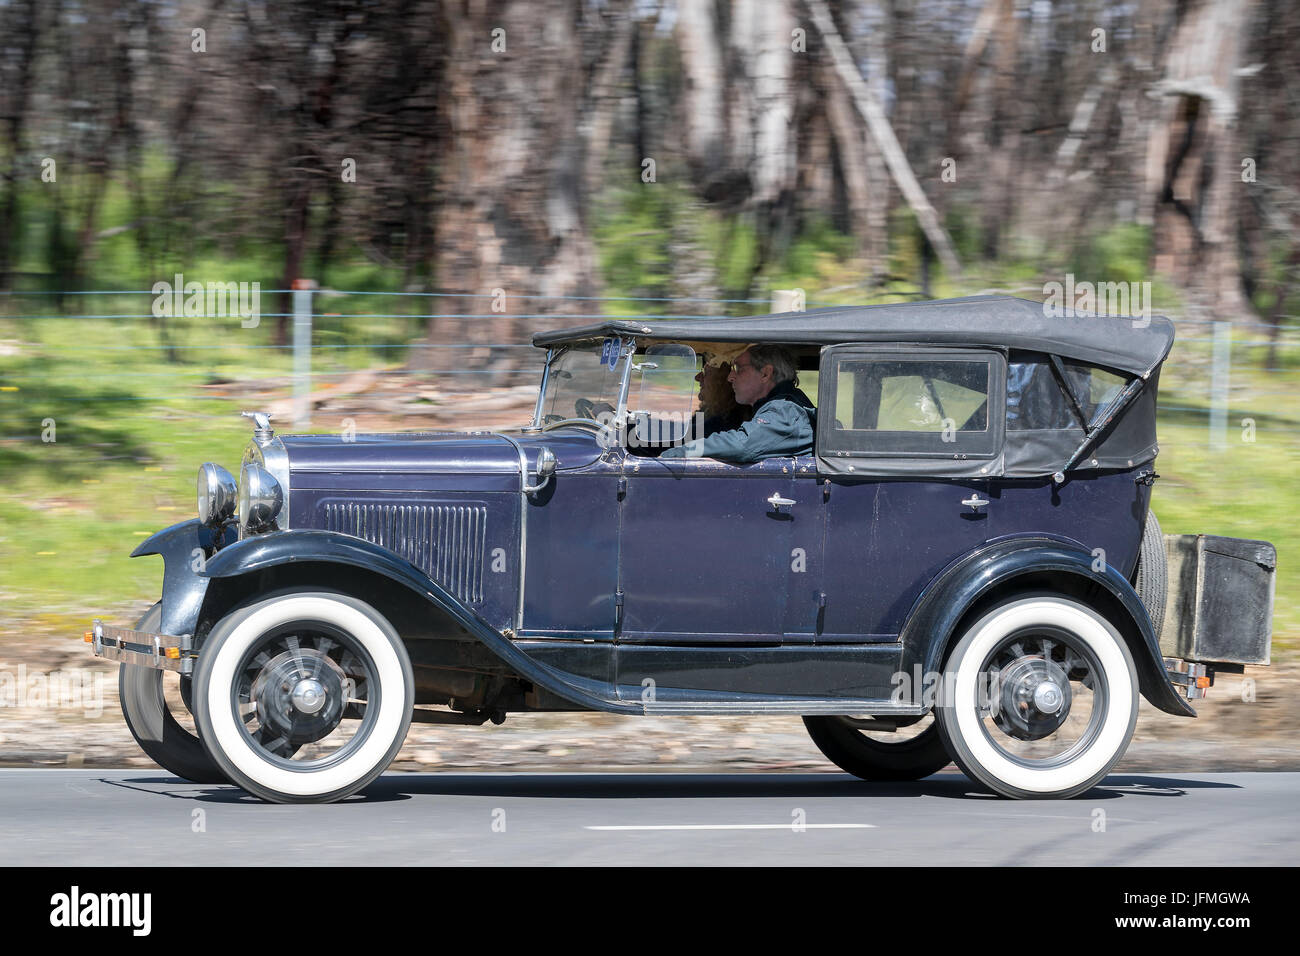 Vintage 1930 Ford Model A Phaeton driving on country roads near the town of Birdwood, South Australia. Stock Photo